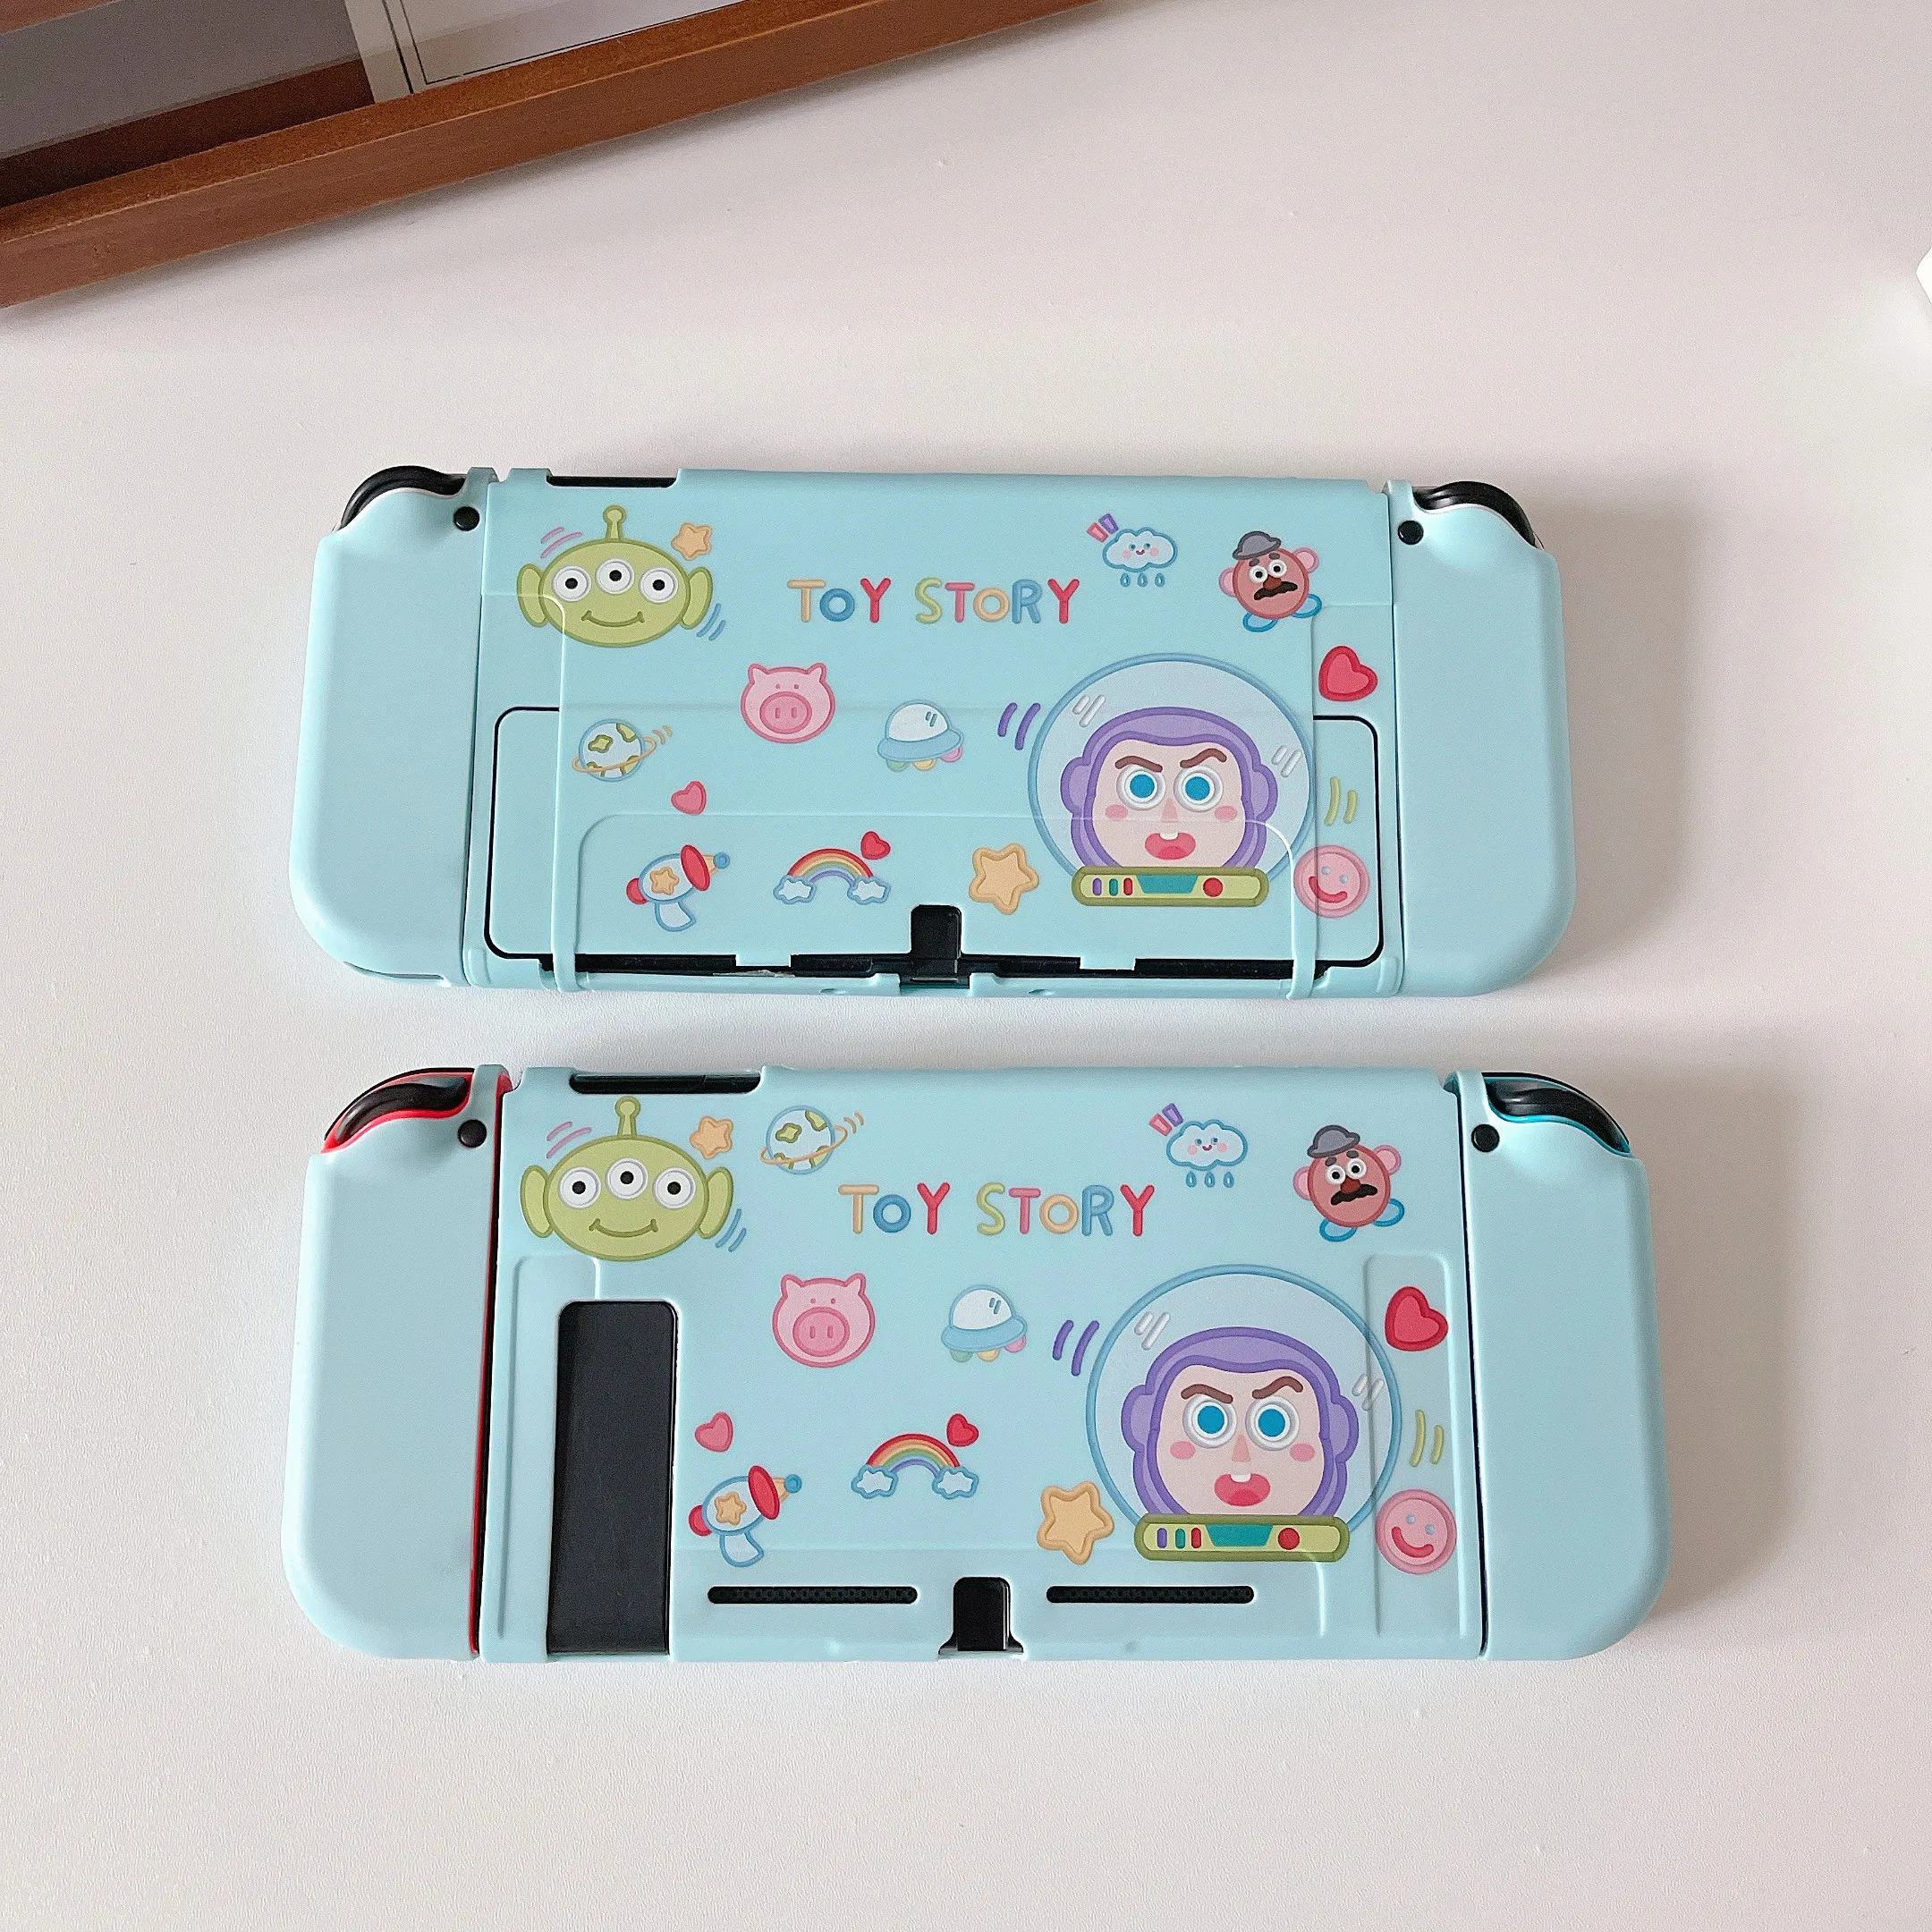 

Toy Story Buzz Lightyear Alien Gudetama XO Soft Phone Cases For Nintendo Switch Game Console Controller OLED Gaming Accessories